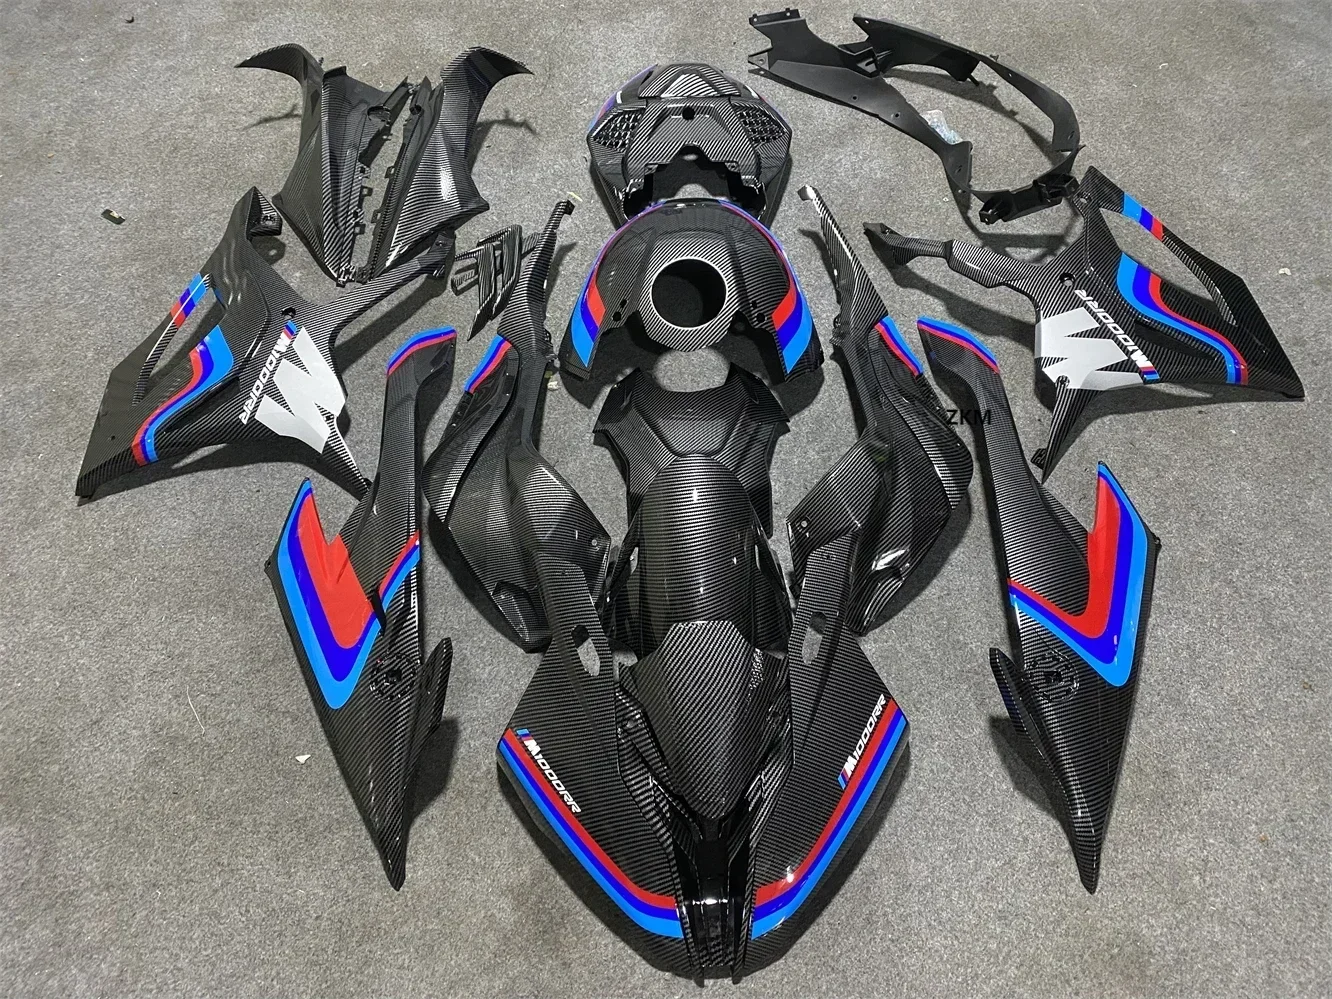 

Motorcycle Fairing Kit For S1000RR S 1000 RR S1000 RR 2019 2020 2021 2022 High Quality ABS Injection Carbon paint Body Kit